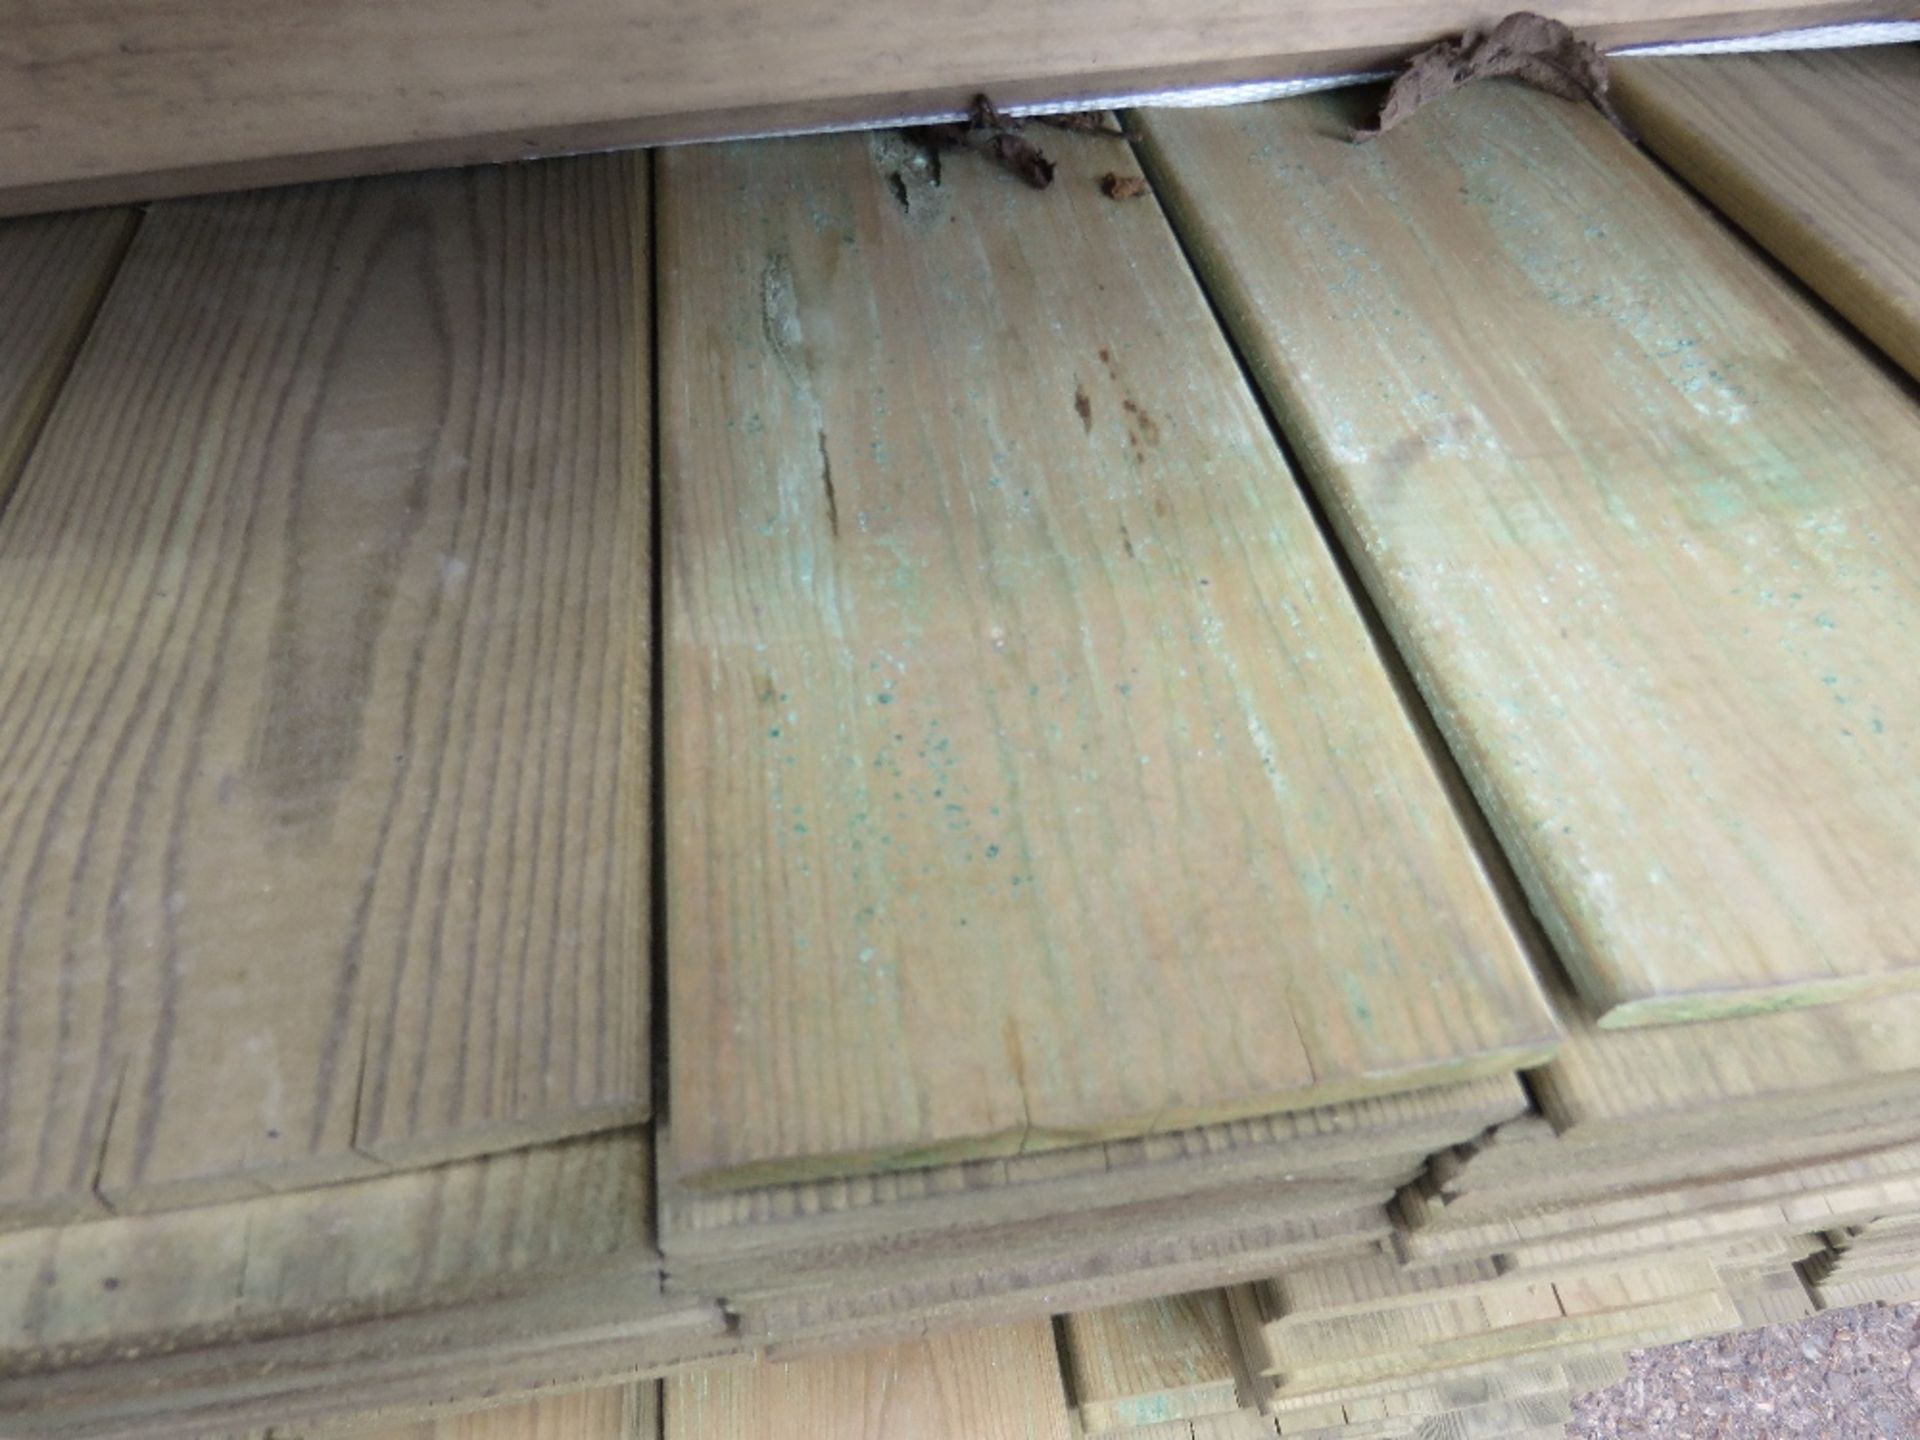 LARGE PACK FLAT MACHINED FINISH CLADDING TIMBER BOARDS 1.74M X 9.5CM APPROX, PRESSURE TREATED. - Image 2 of 3